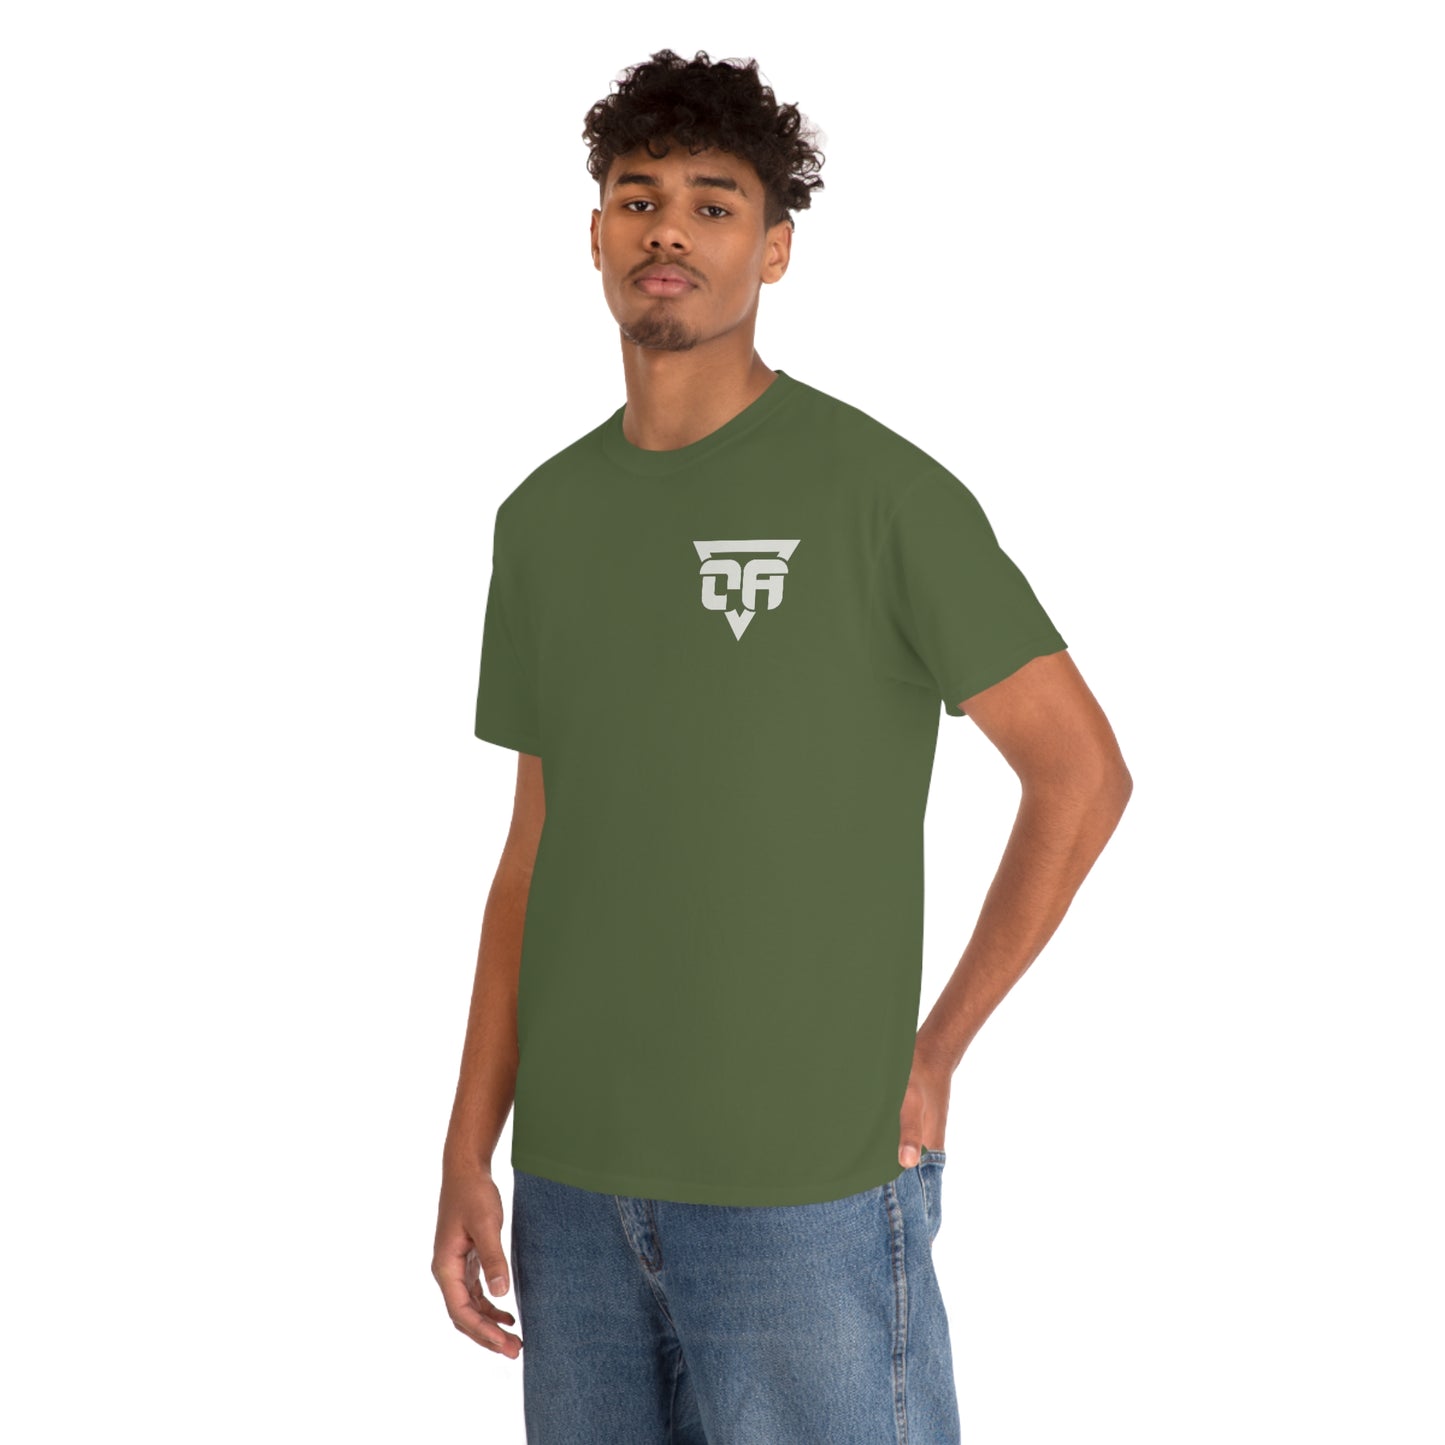 OA Stay Brave Military Green